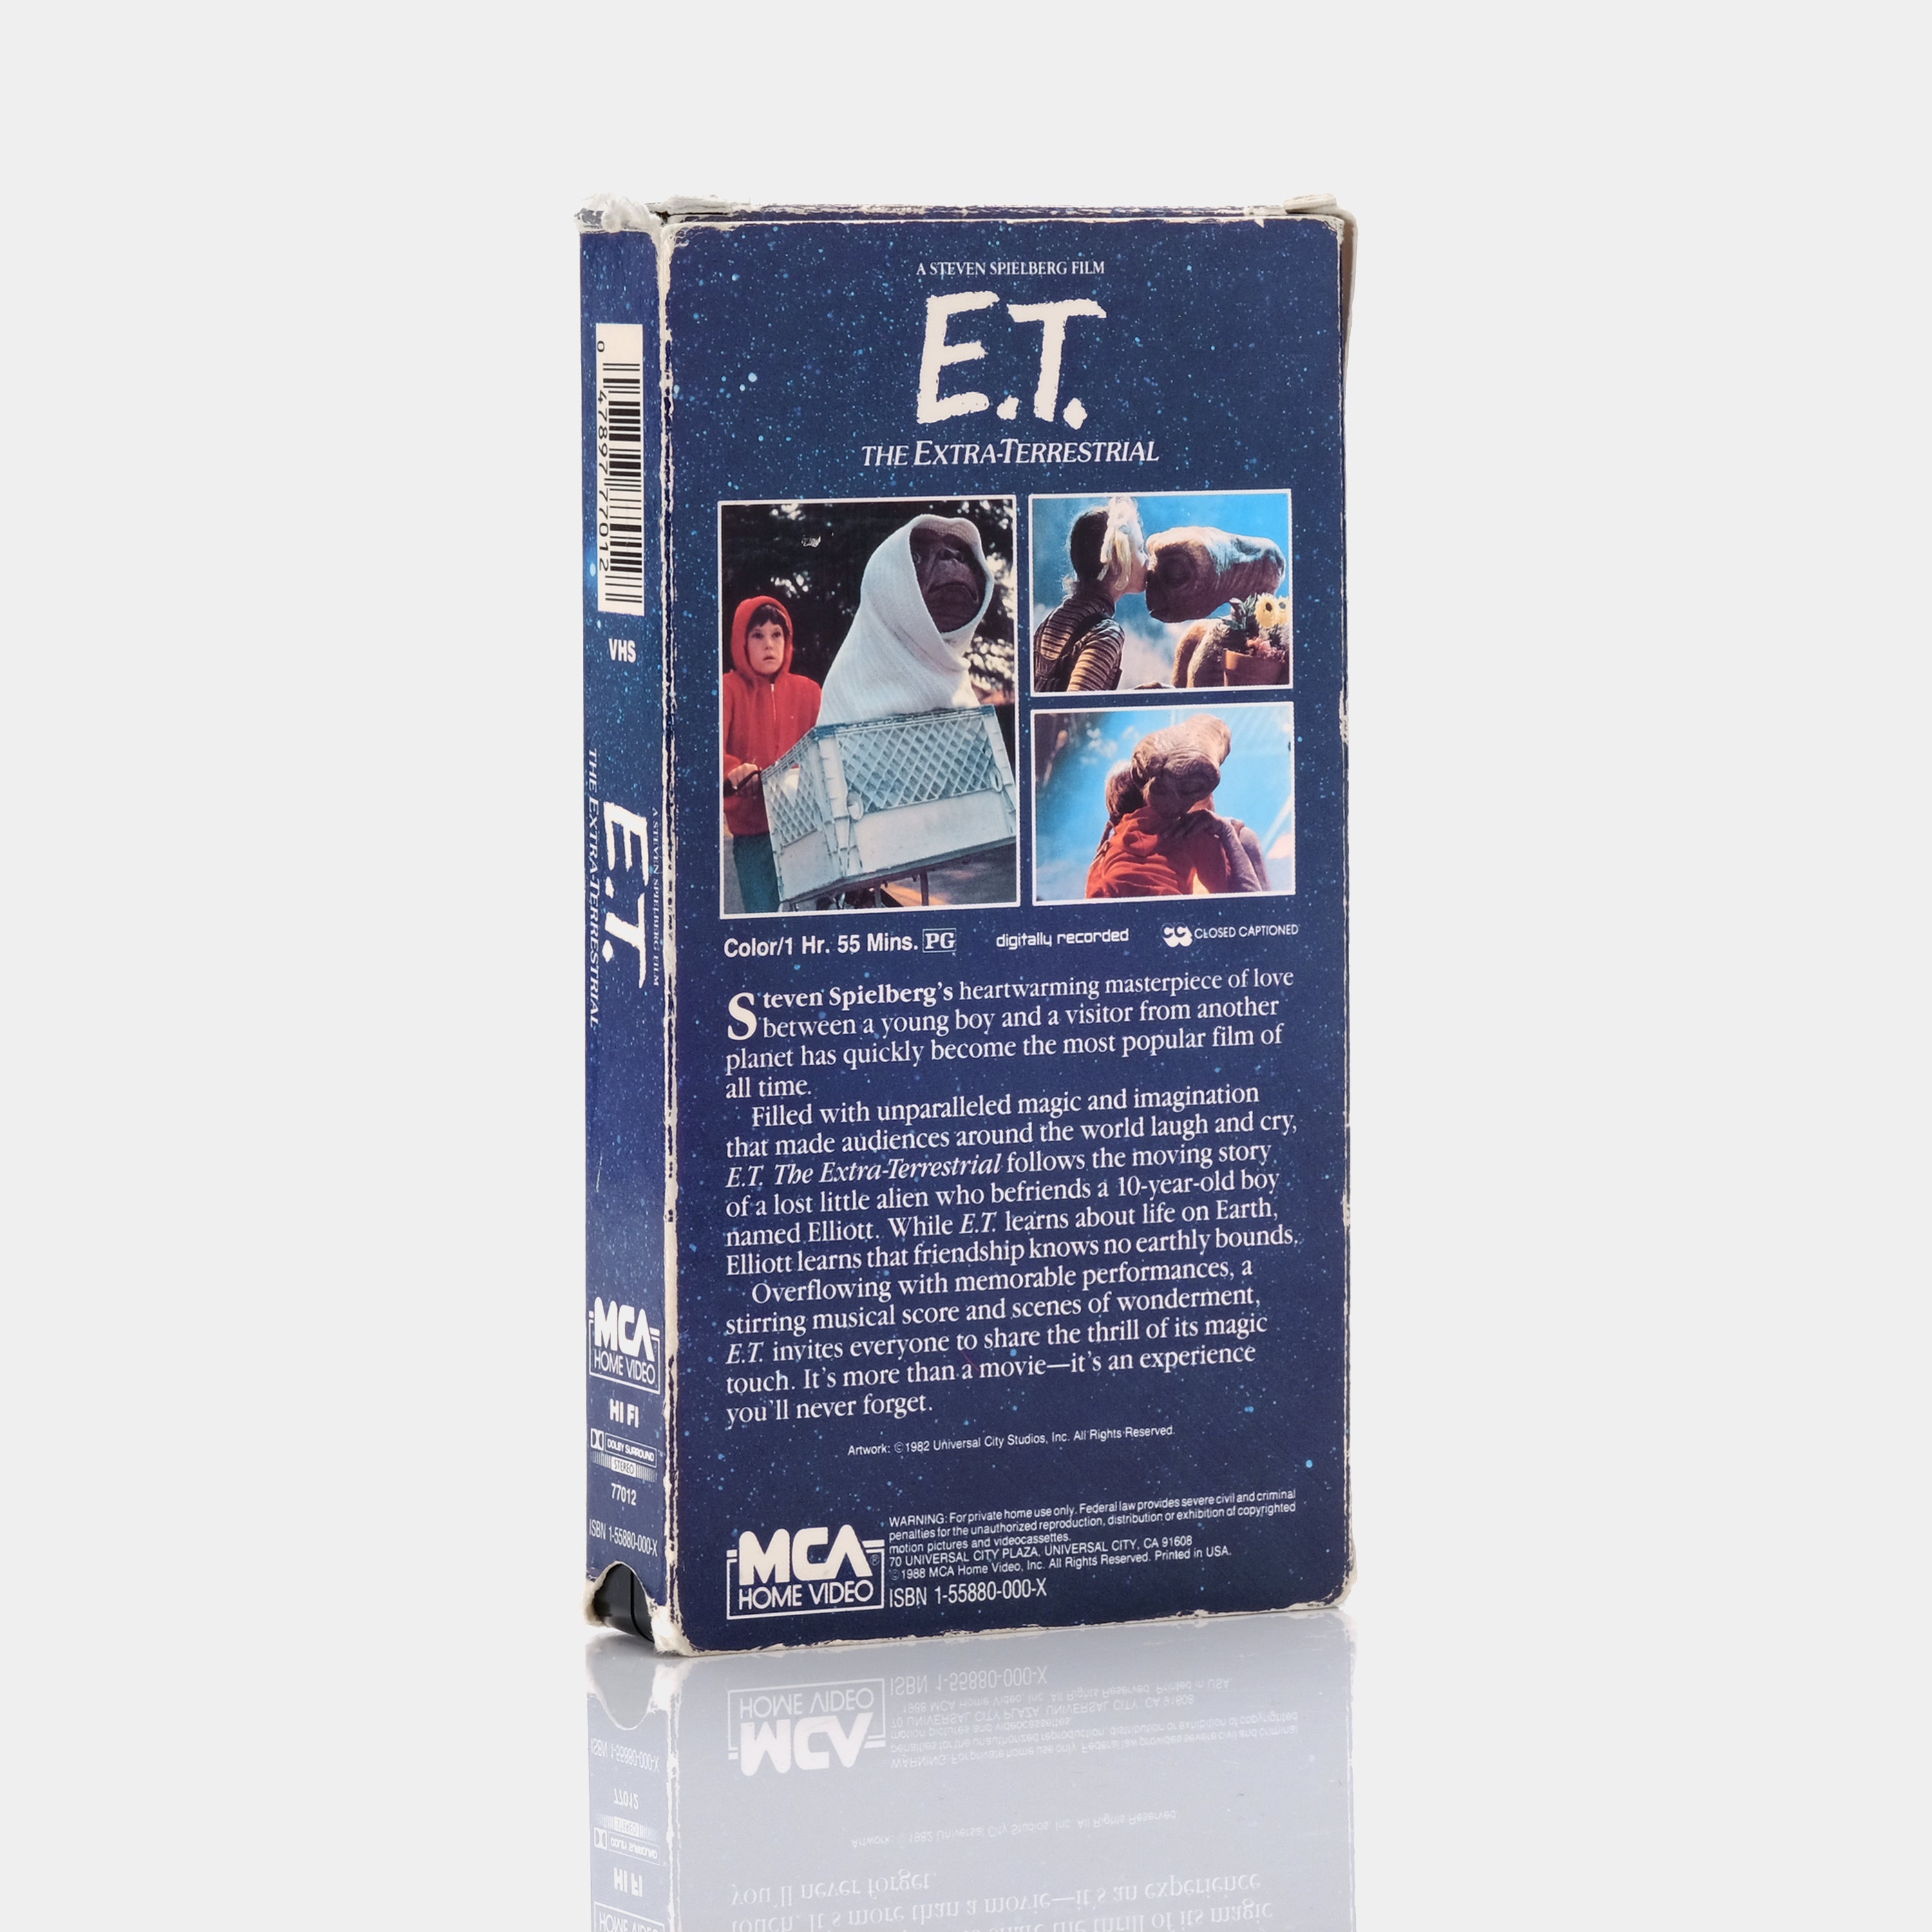 E.T. the Extra-Terrestrial VHS Tape